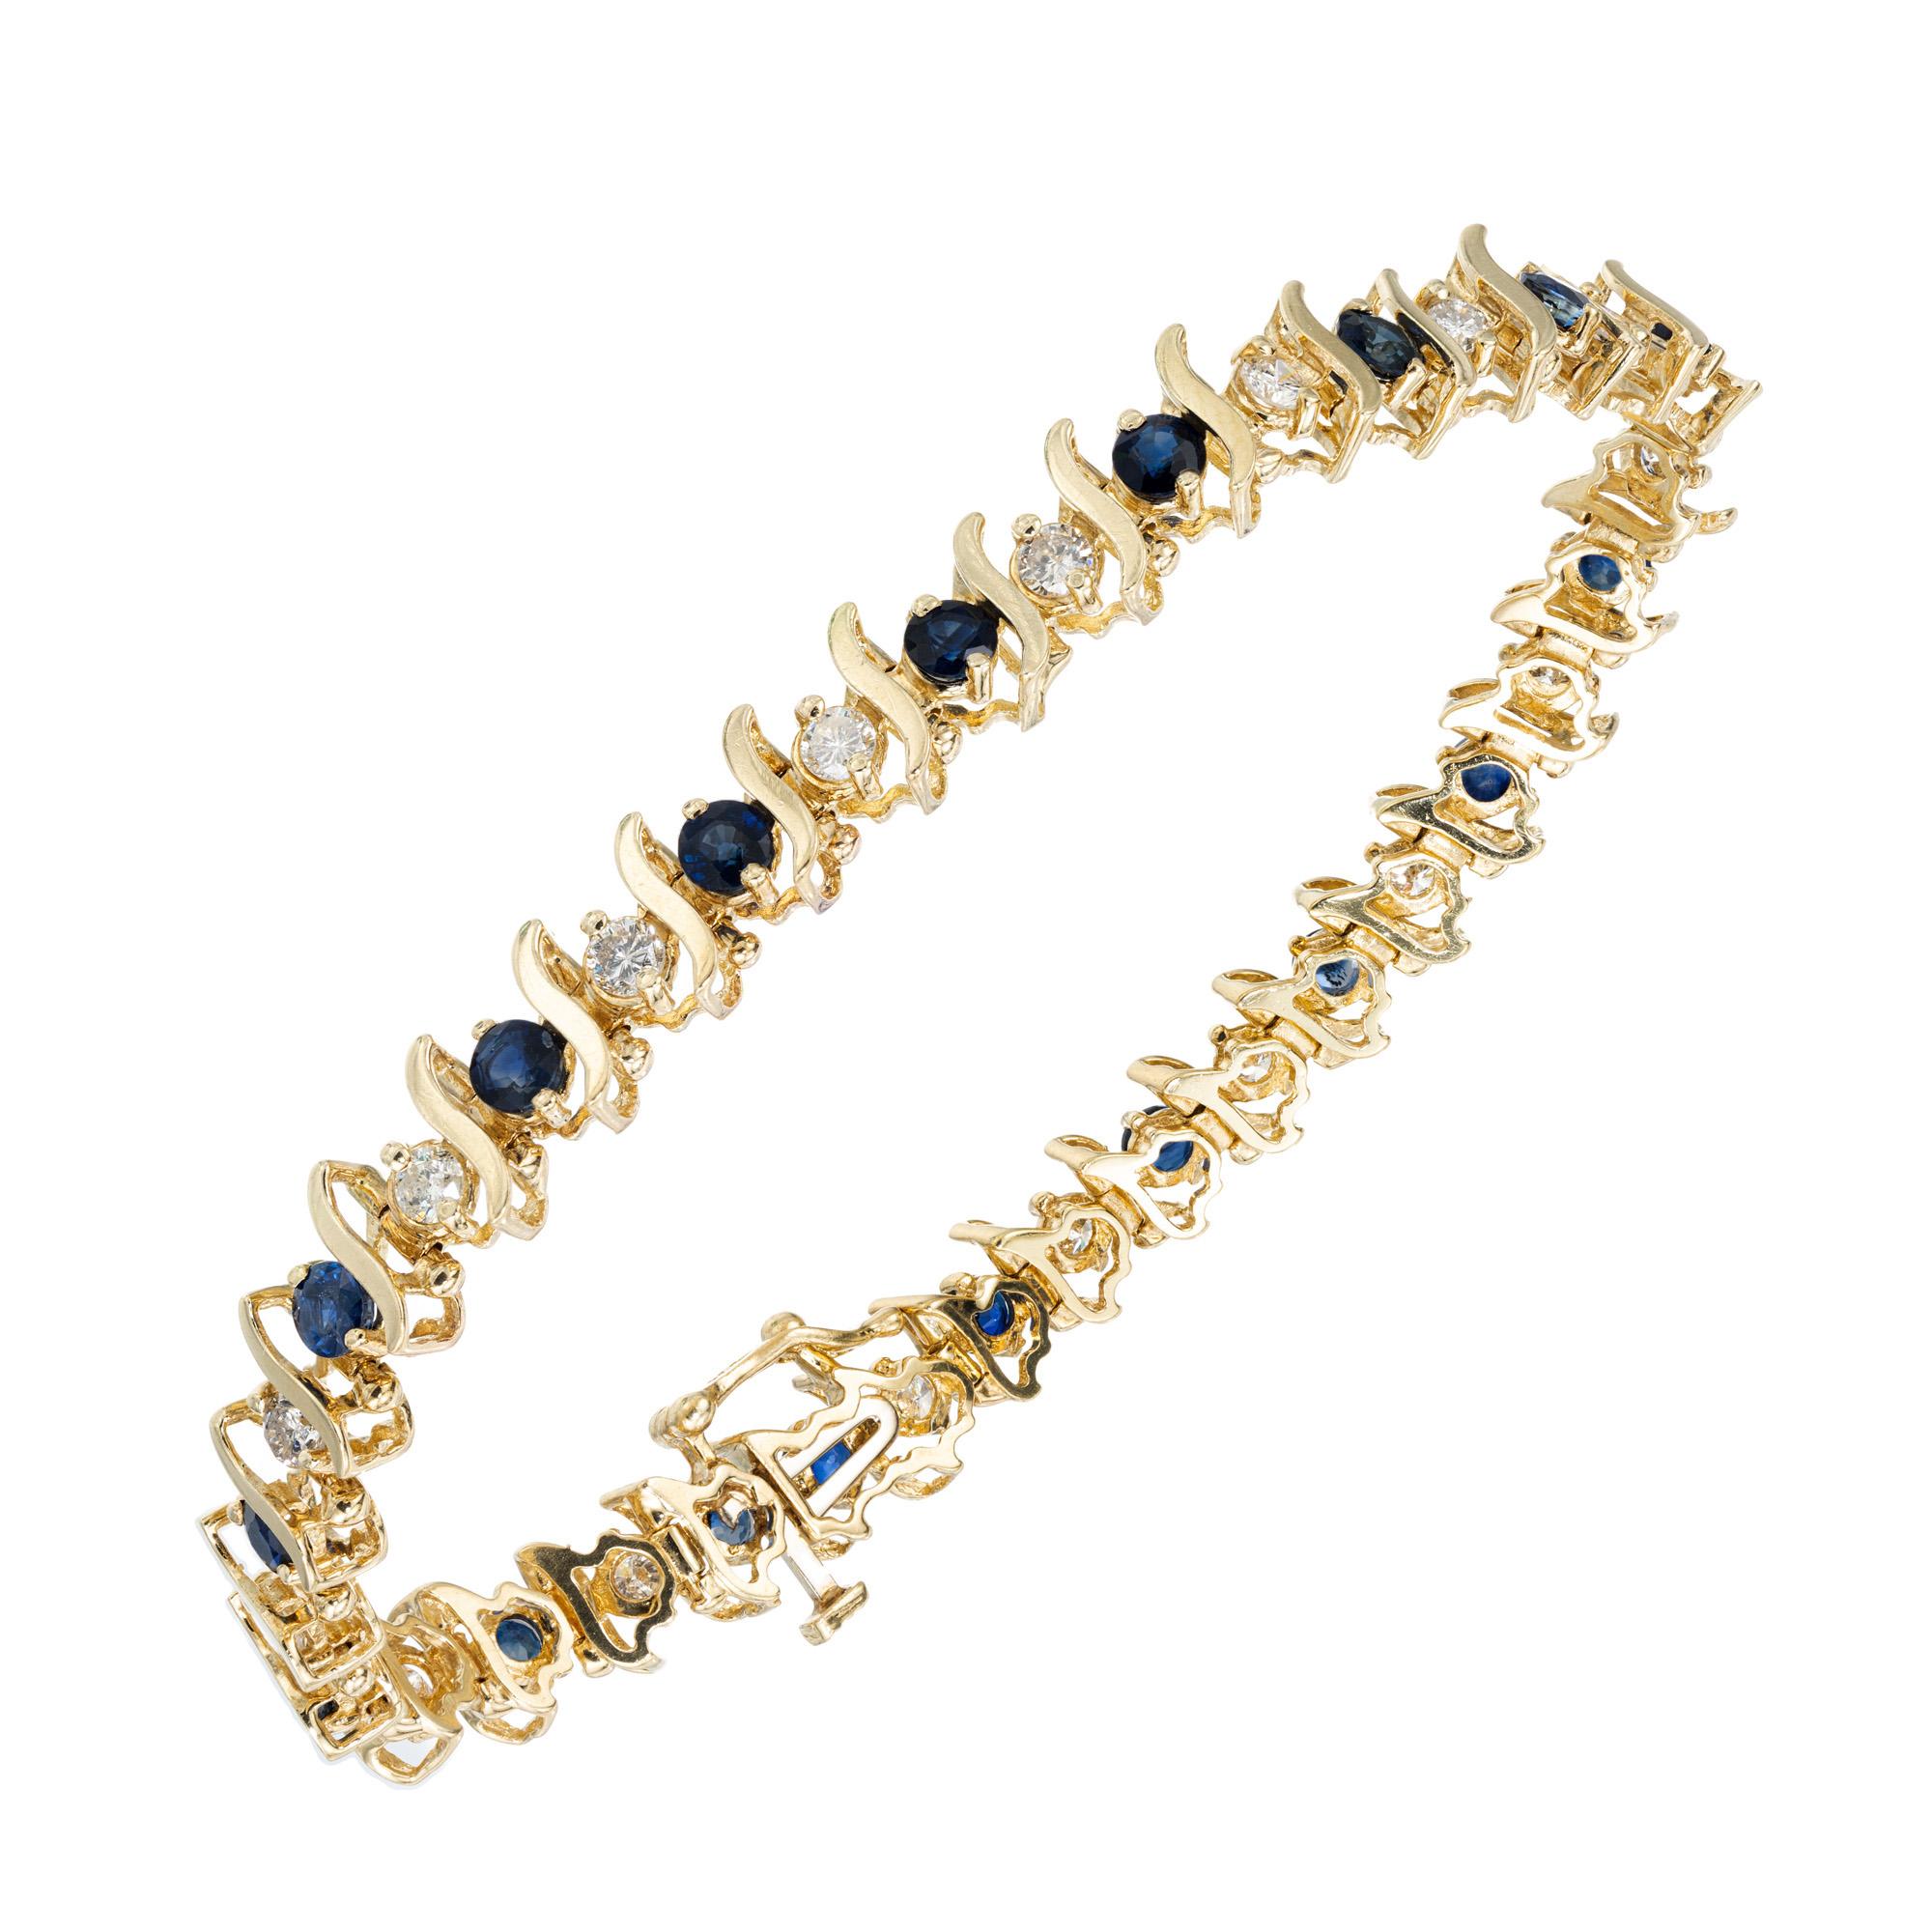 Early 1980's Diamond and Sapphire patterned yellow gold bracelet. S link. 17 round sapphires totaling 2.55cts alternating with 17 round cut diamonds with gold S wave spacers between them. 7 inches in length. 

17 genuine Sapphires approx. total